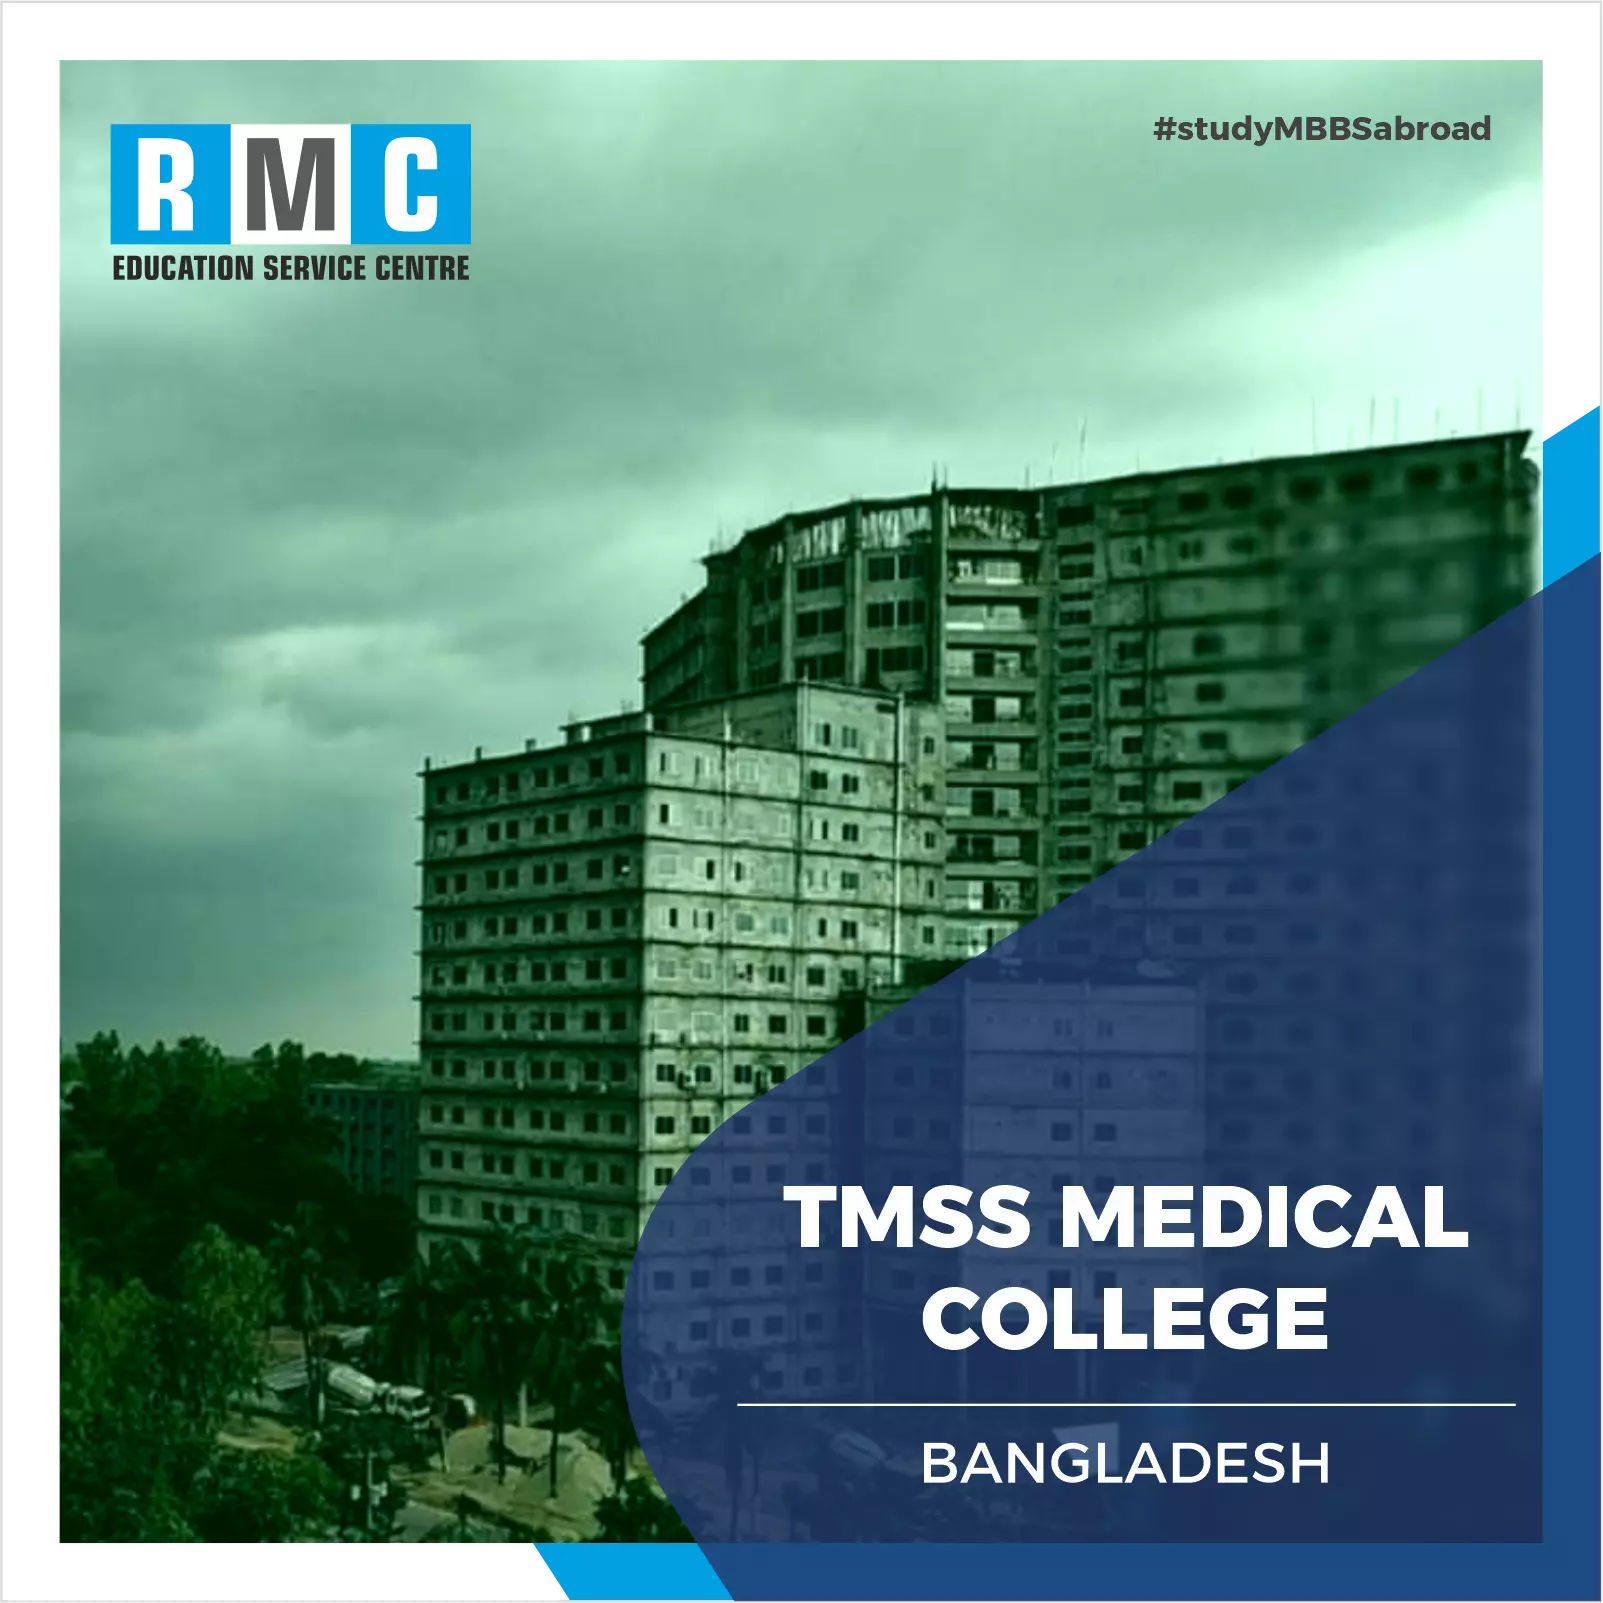 TMSS Medical College